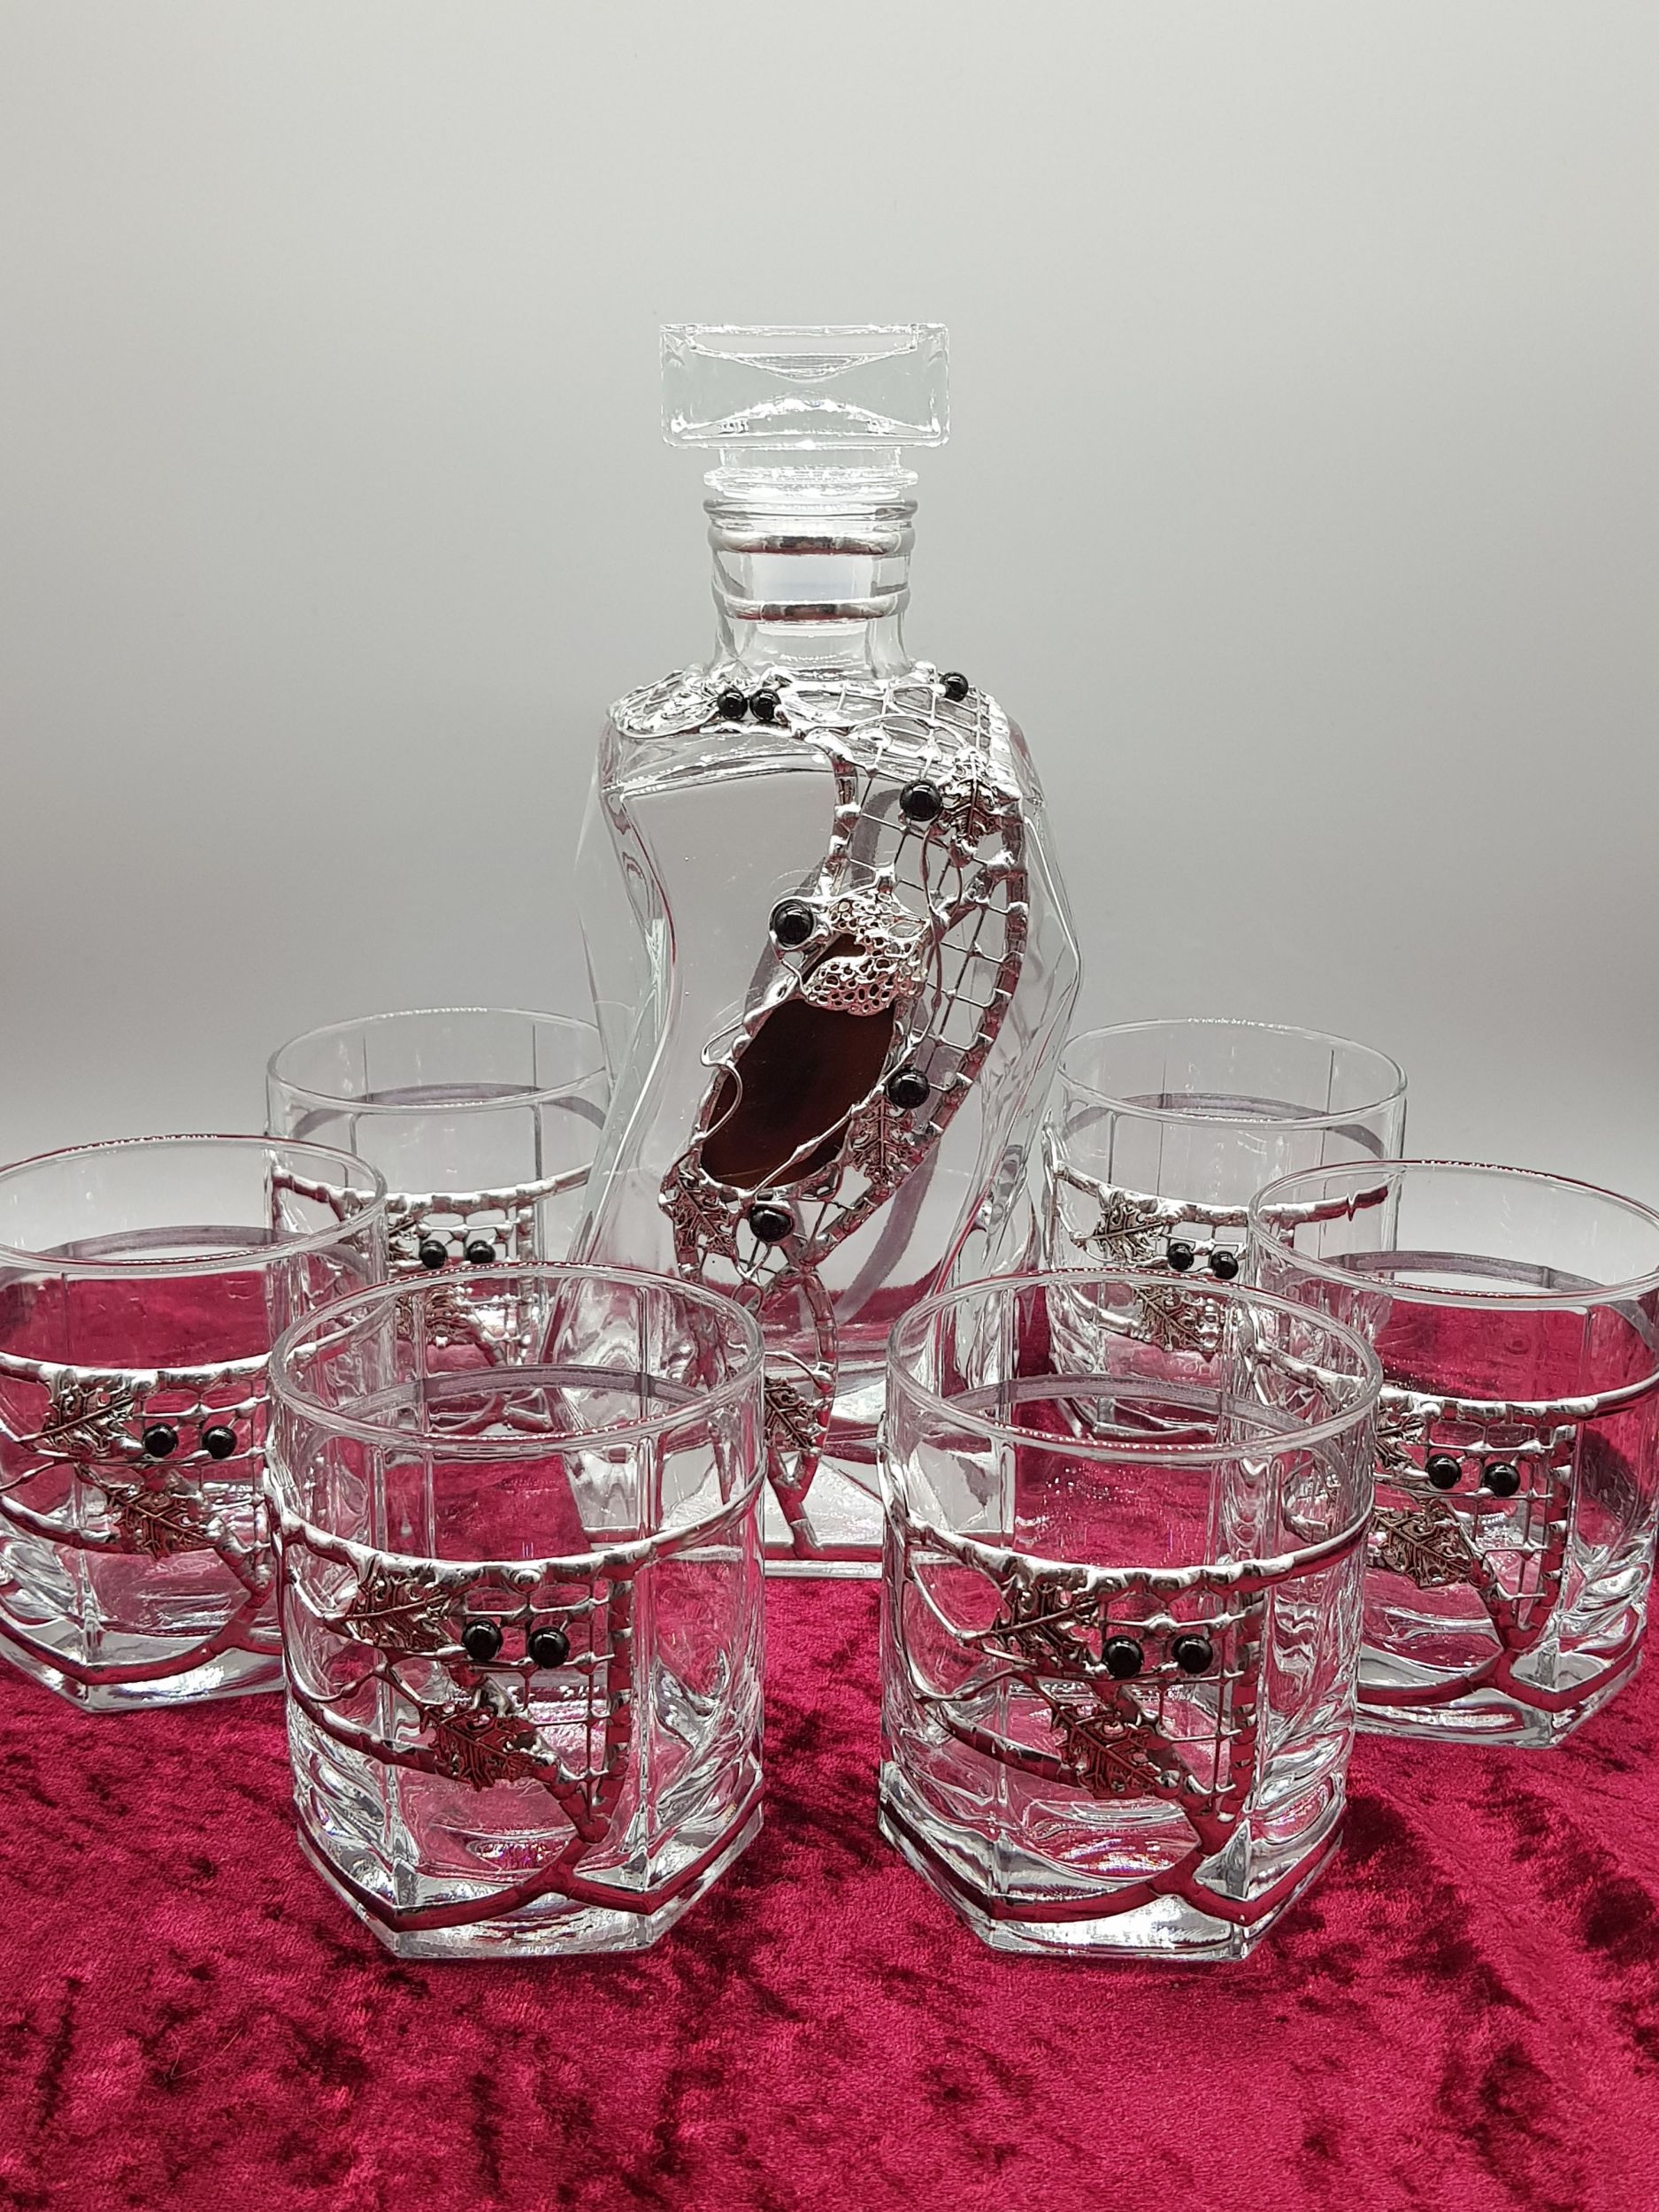 SIX WHISKY GLASSES AND DECANTER